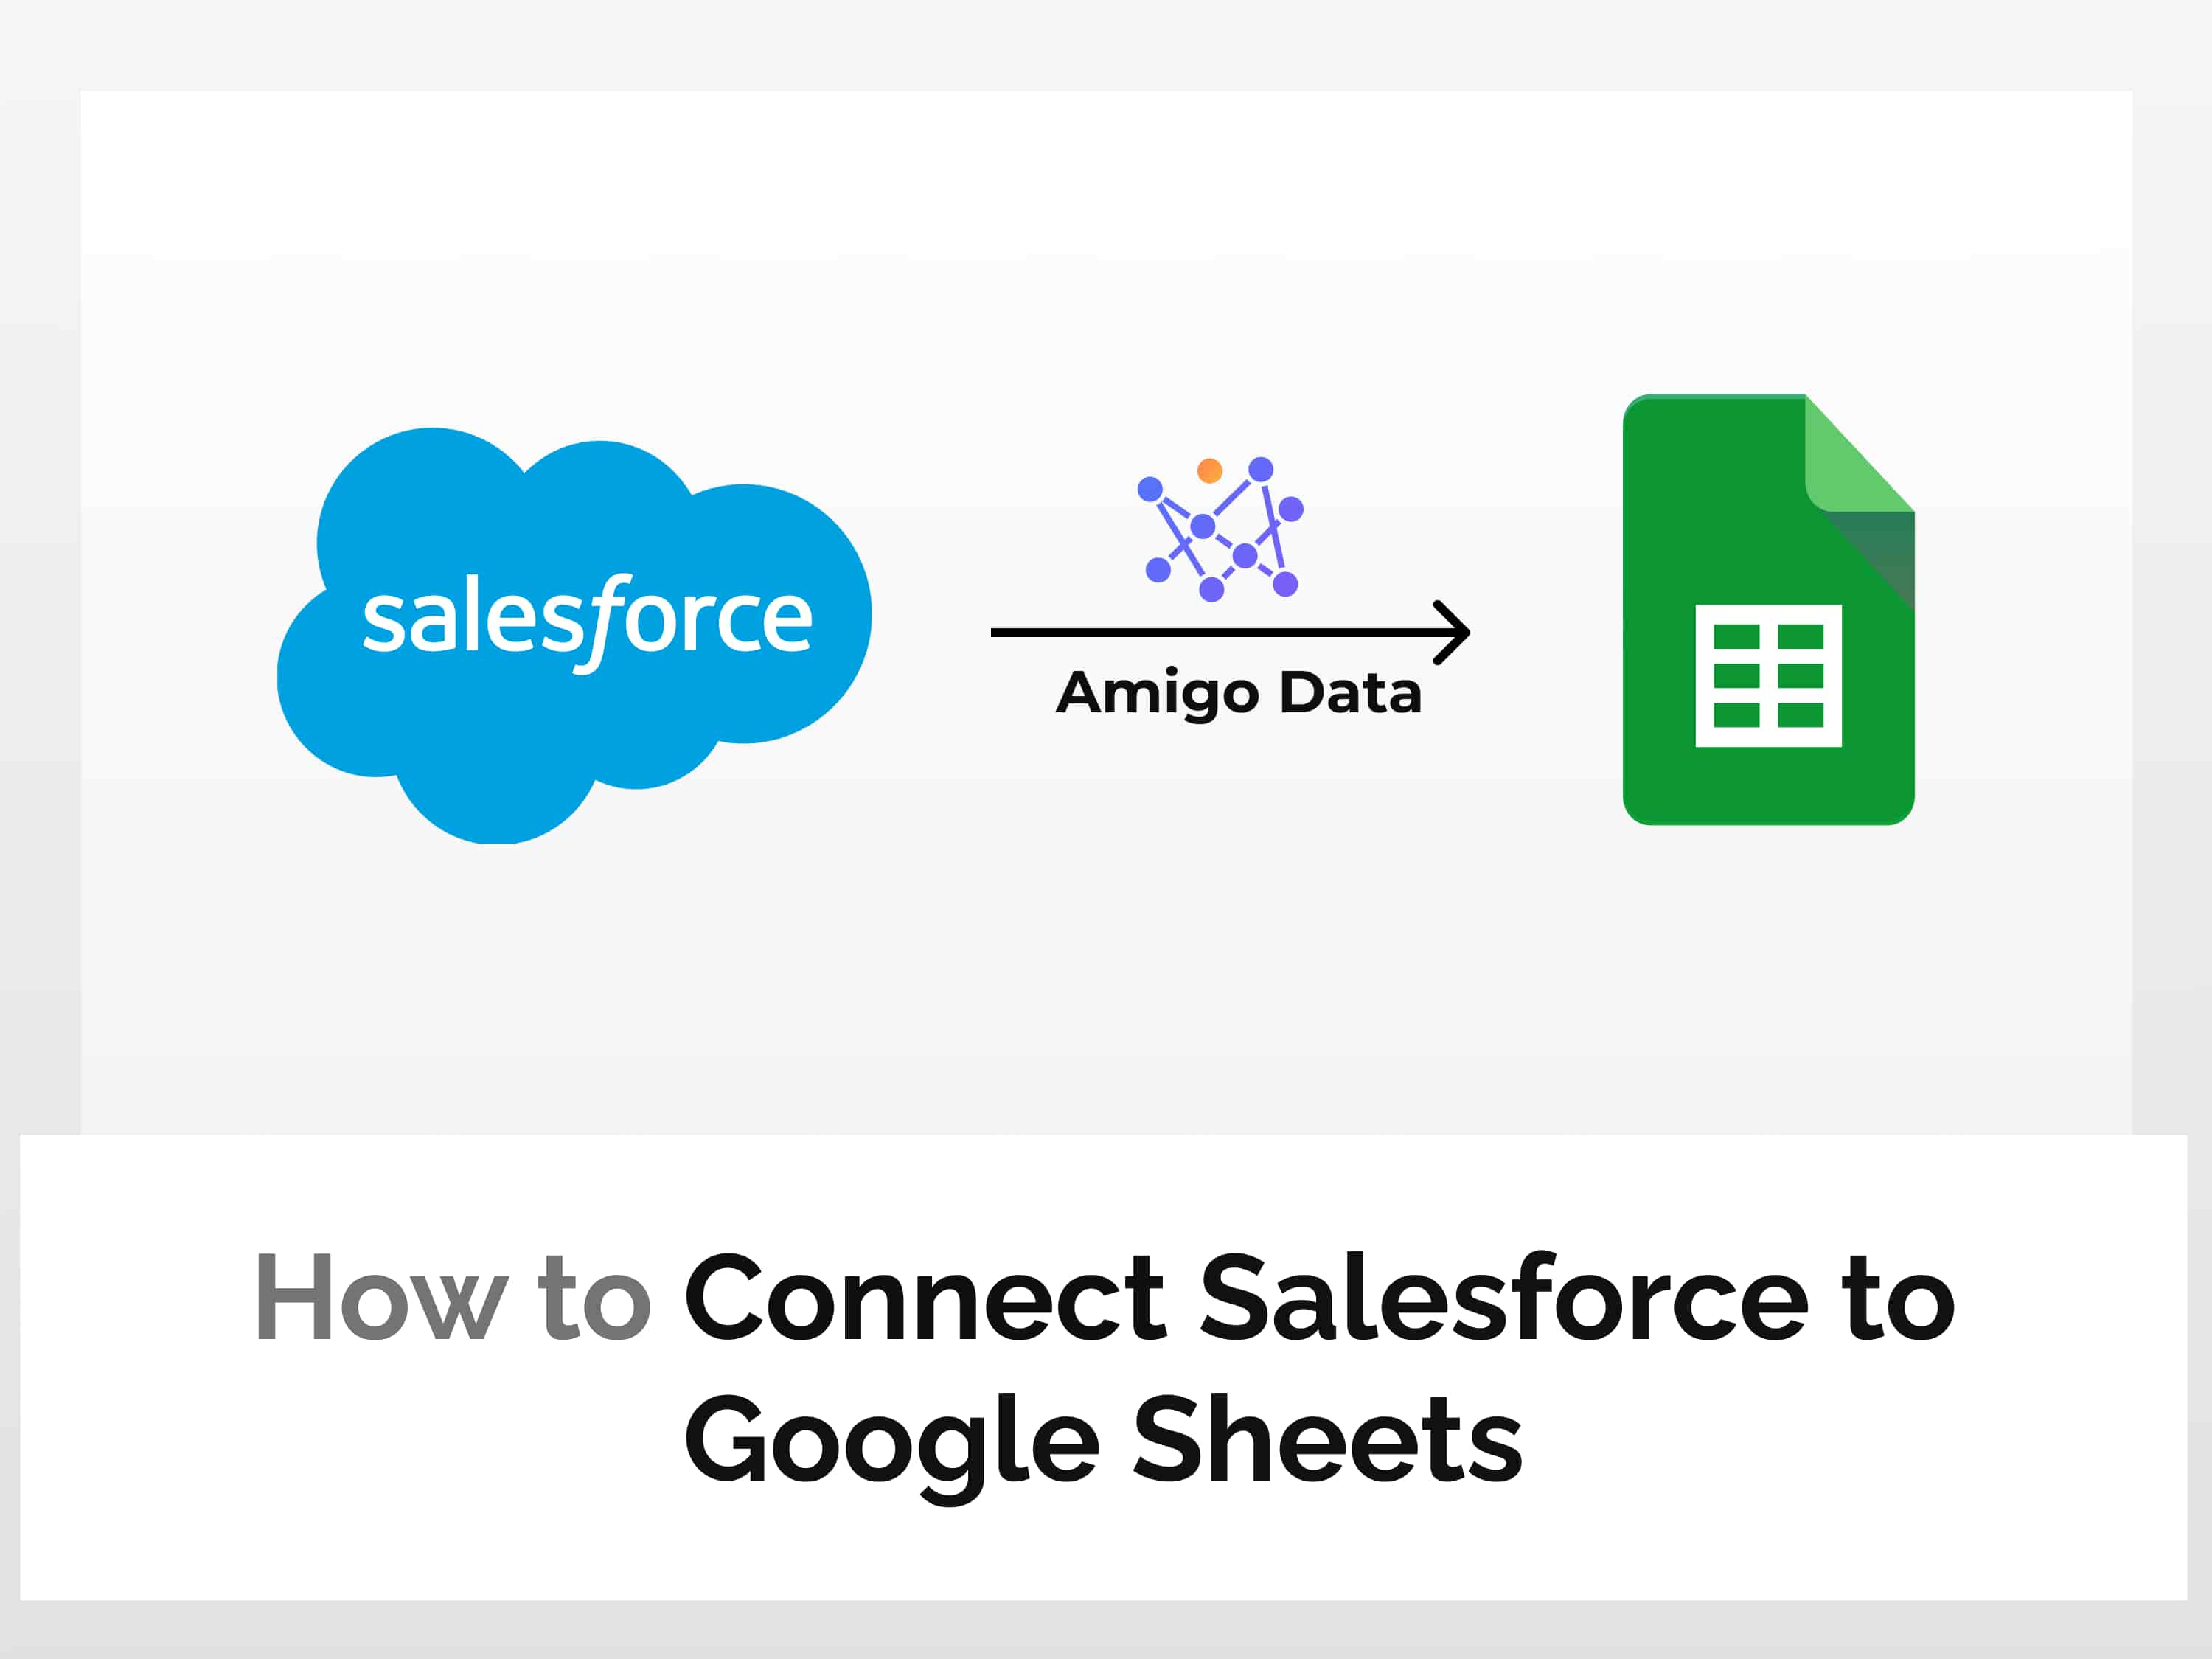 How to connect Salesforce to Google Sheets